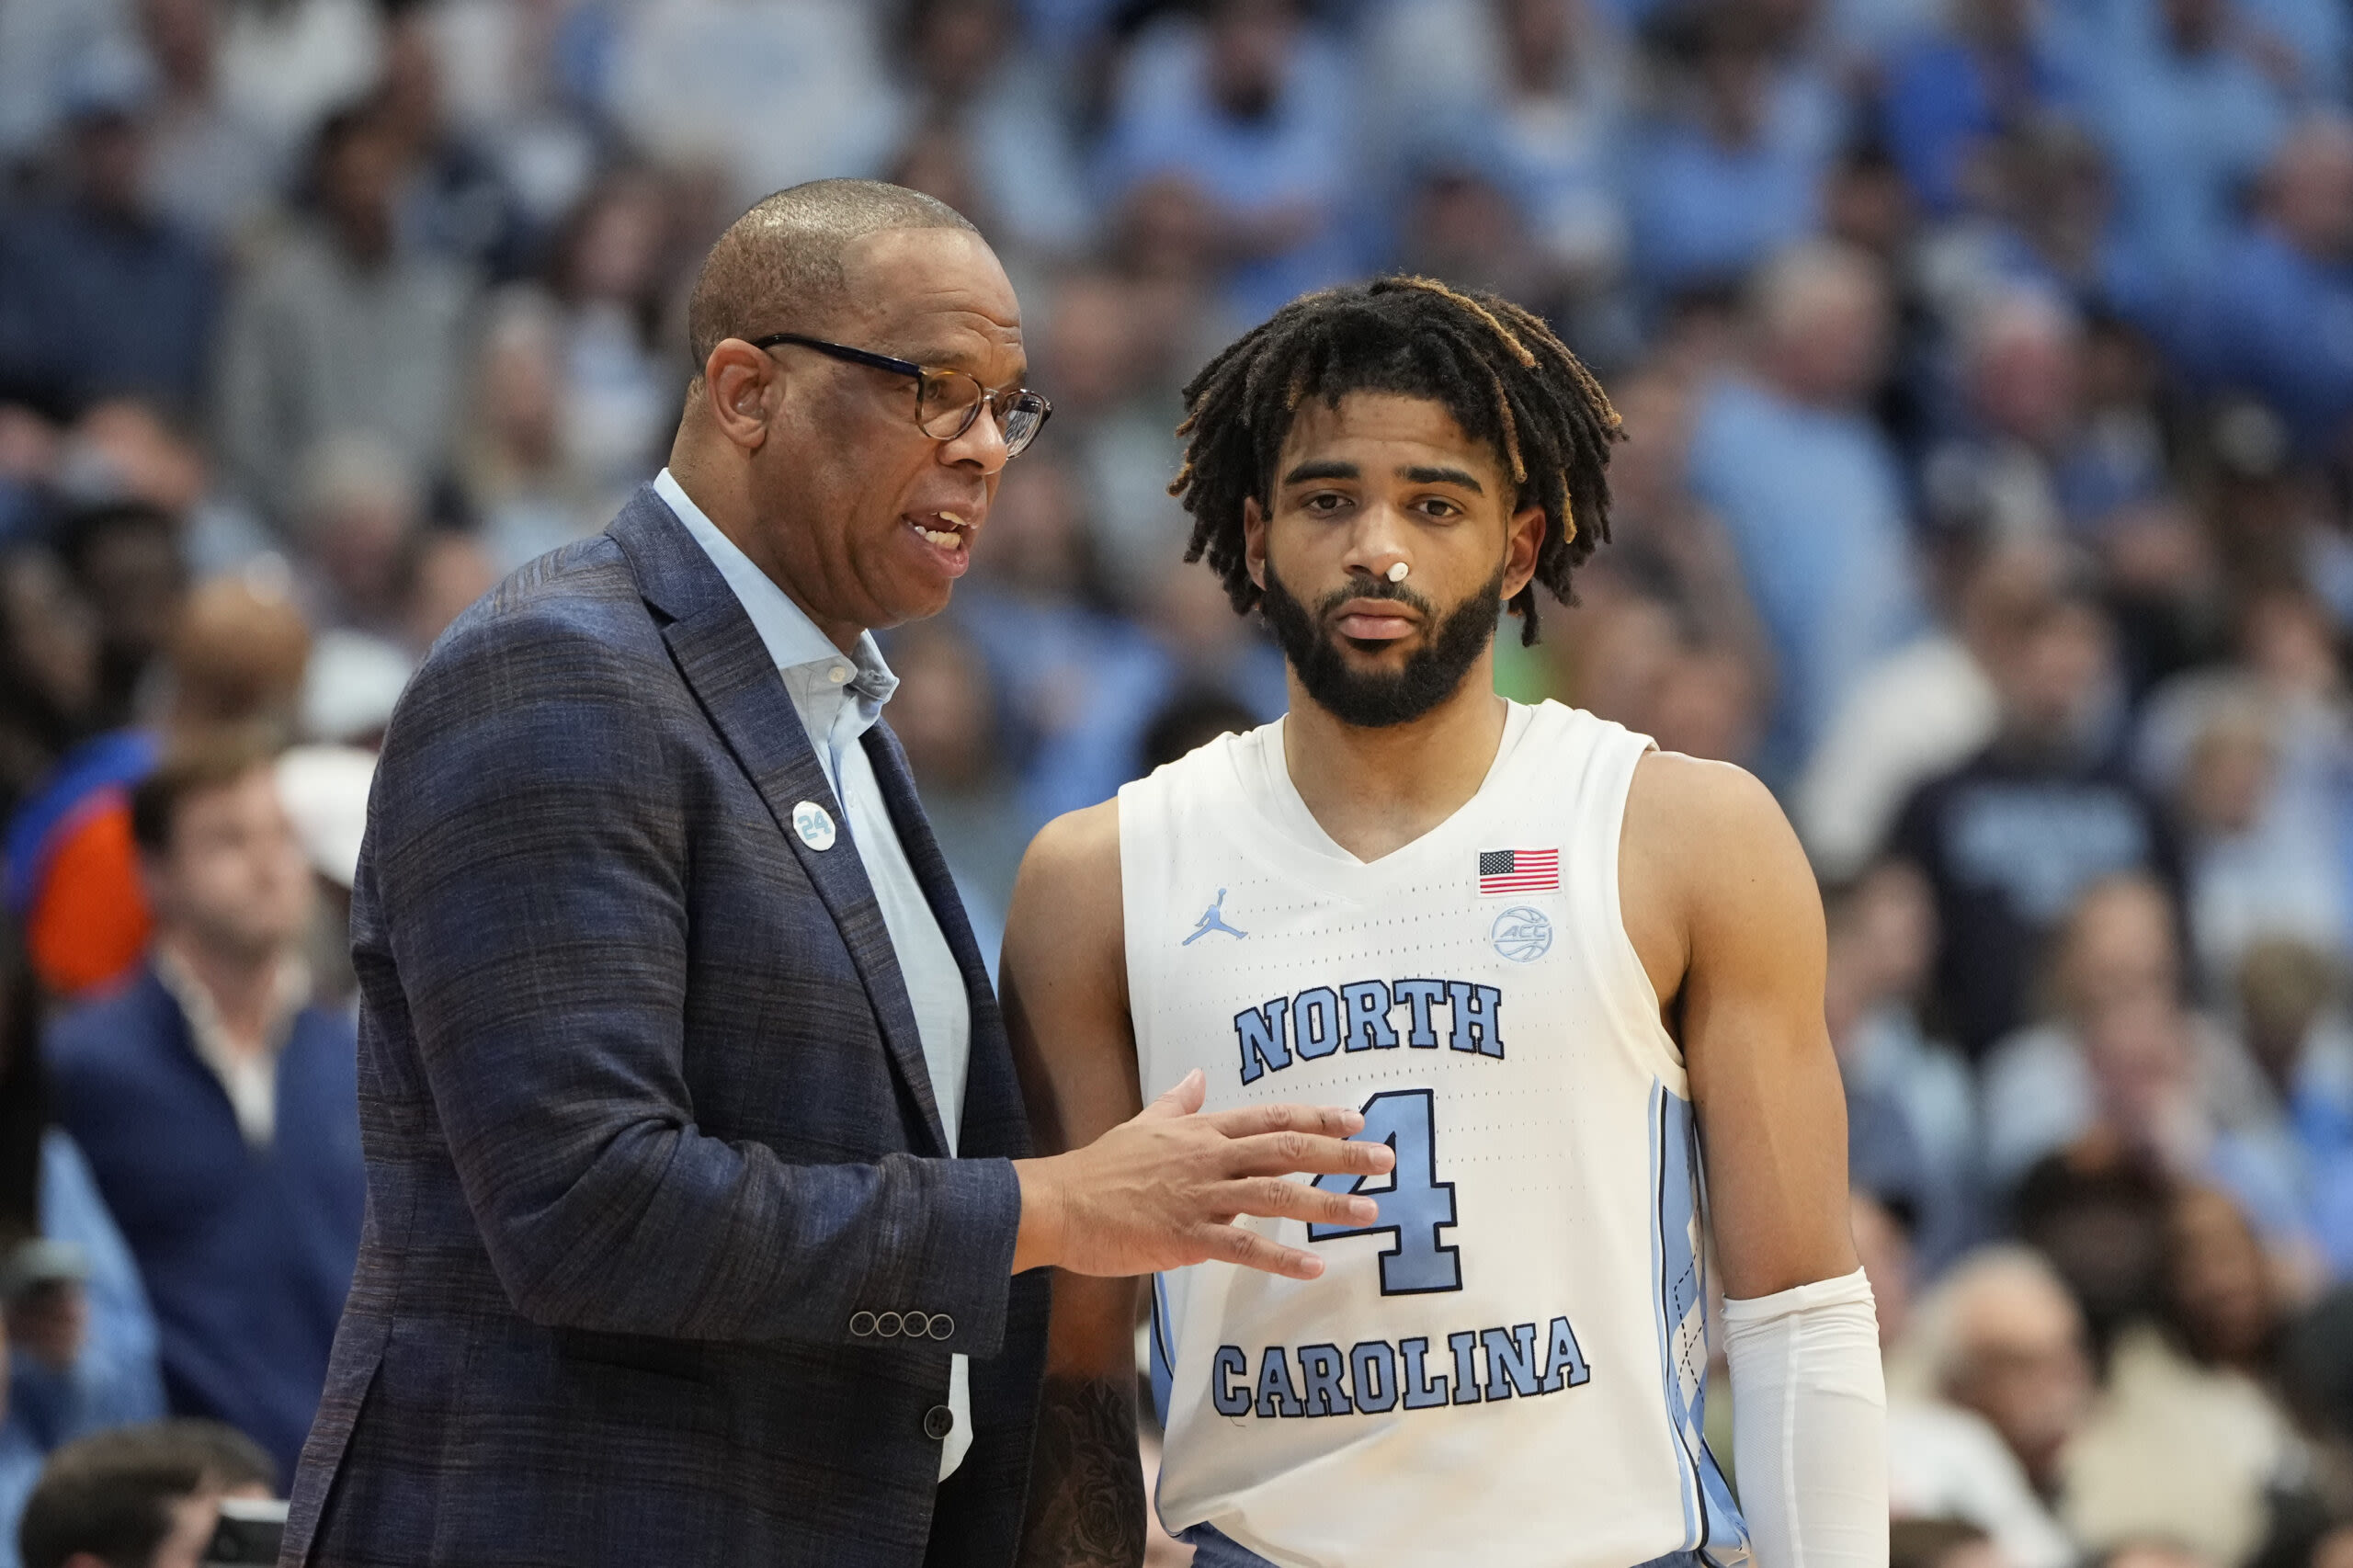 UNC men’s basketball coaching staff the only Power 5 program to hold which honor?